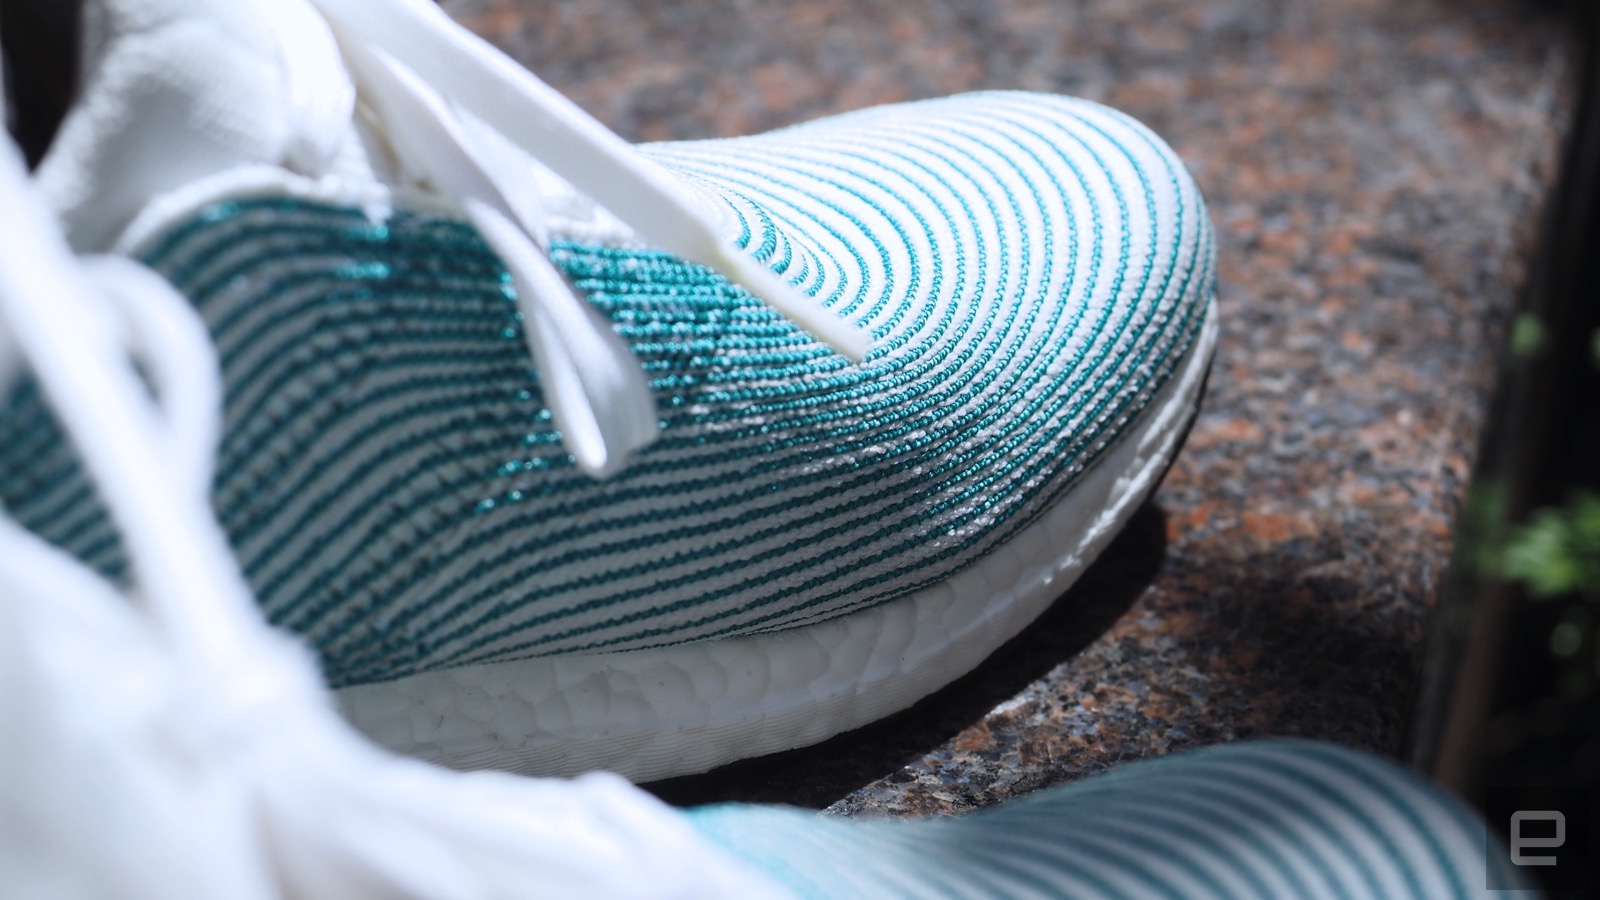 herhaling Bakkerij Fabrikant Adidas gets creative with shoes made from recycled ocean plastic | Engadget